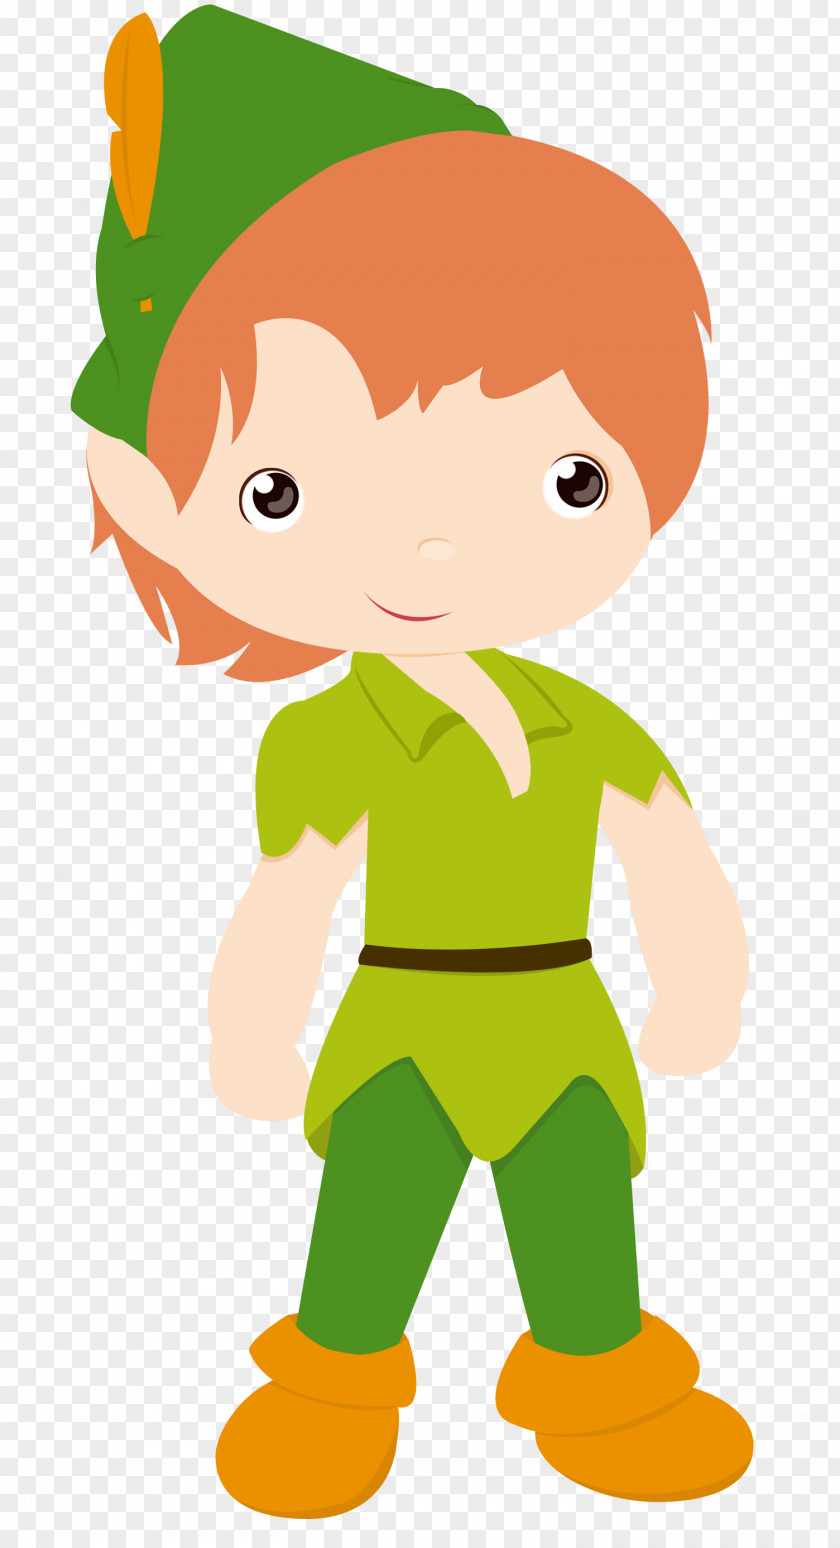 Peter Pan Neverland Tinker Bell Captain Hook And Wendy PNG